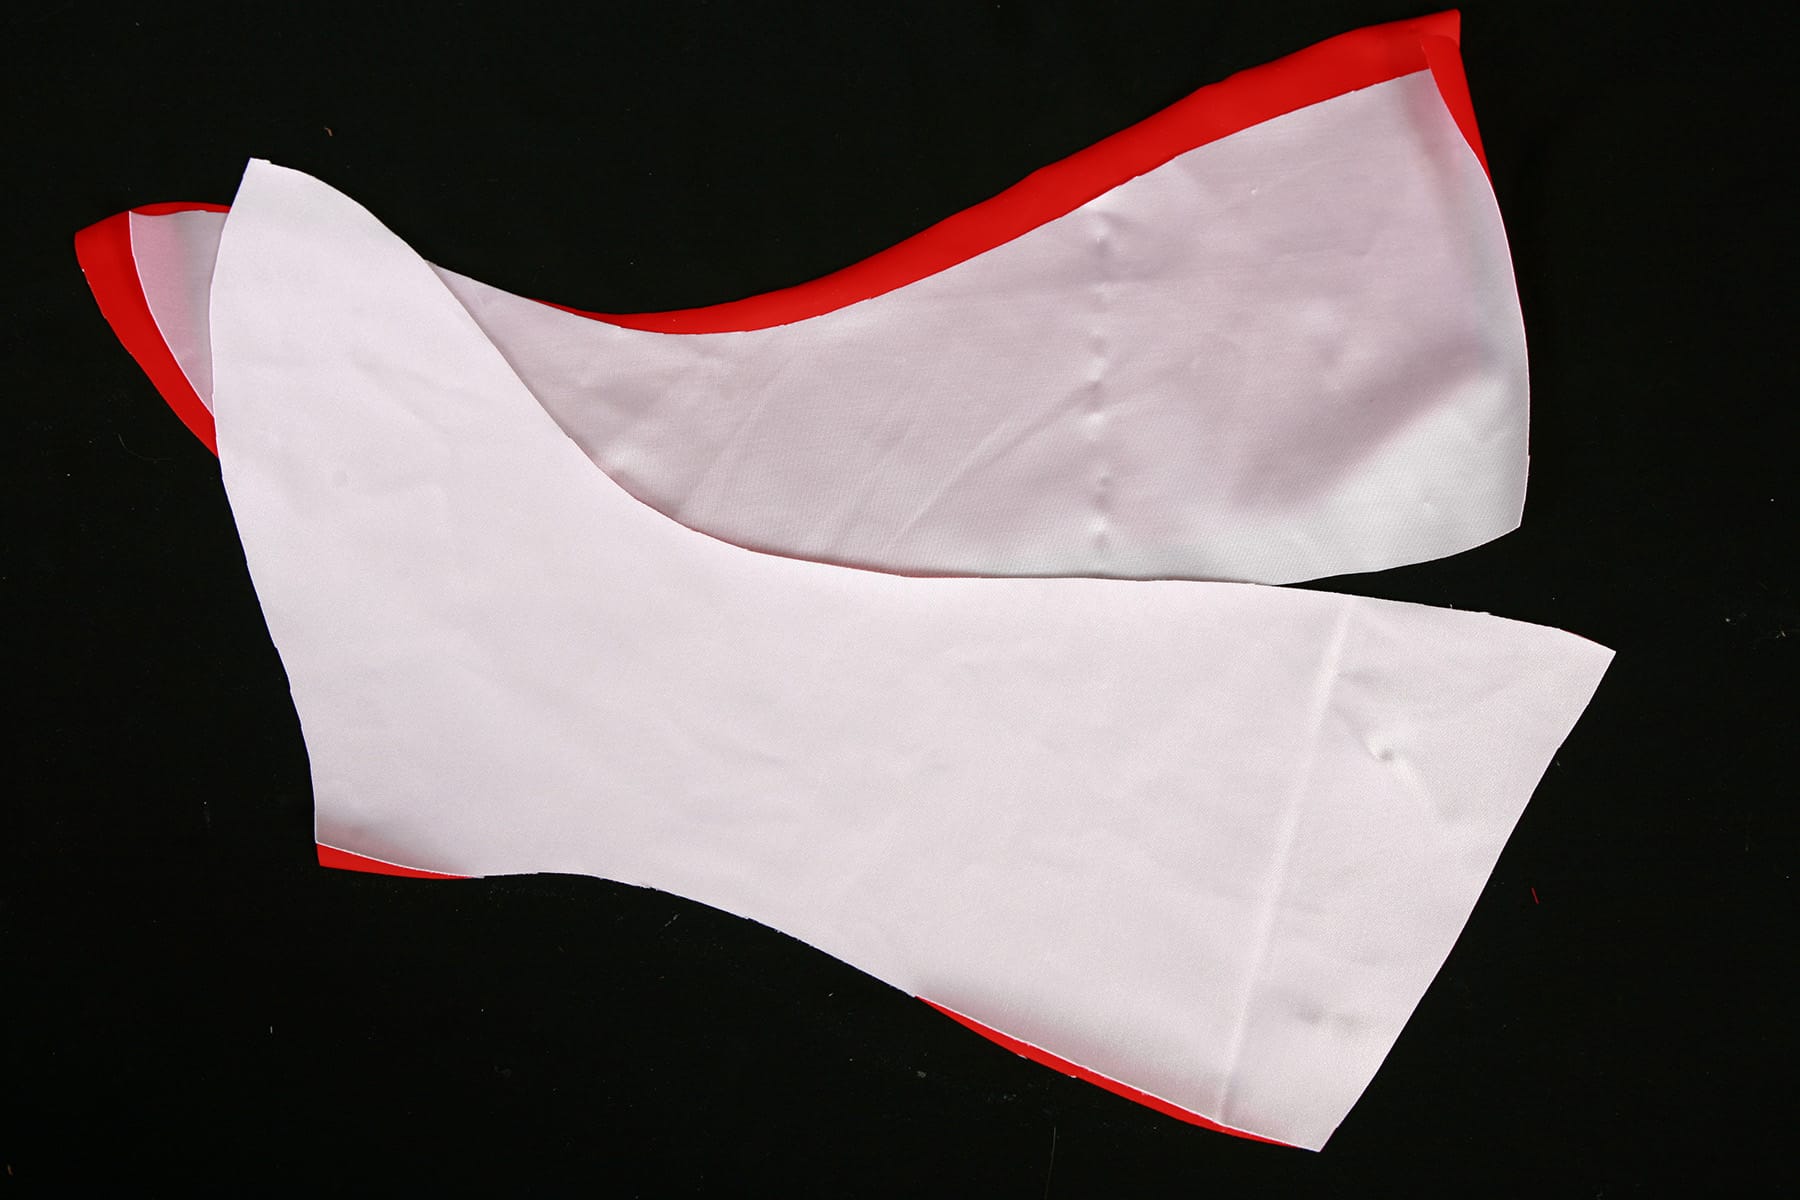 Two boot covers cut from red and white fabric, against a black background.